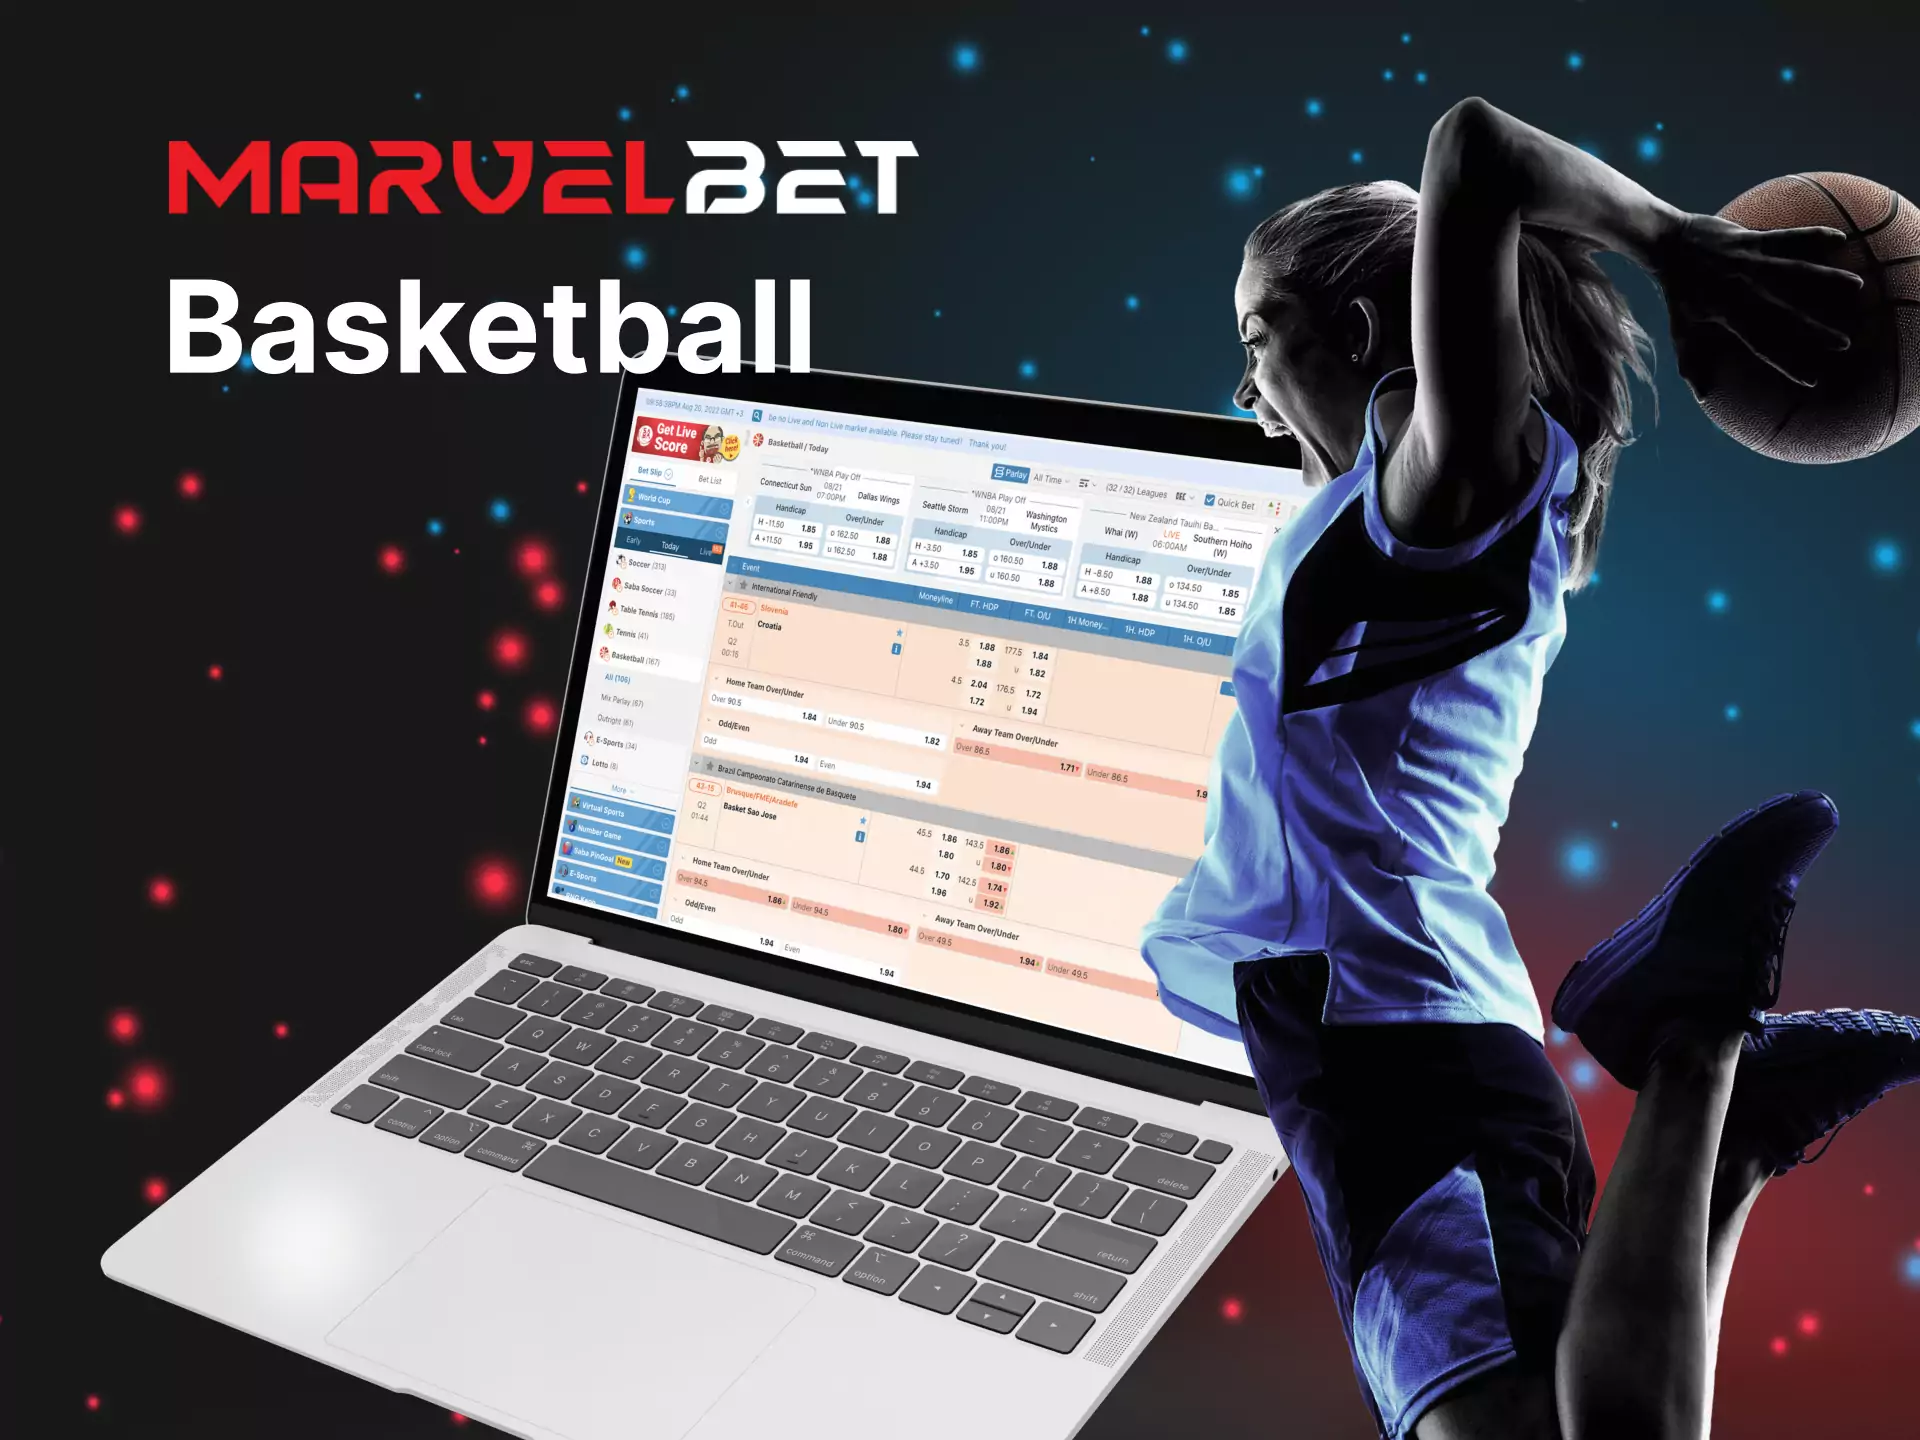 Basketball matches are available for betting on Marvelbet.